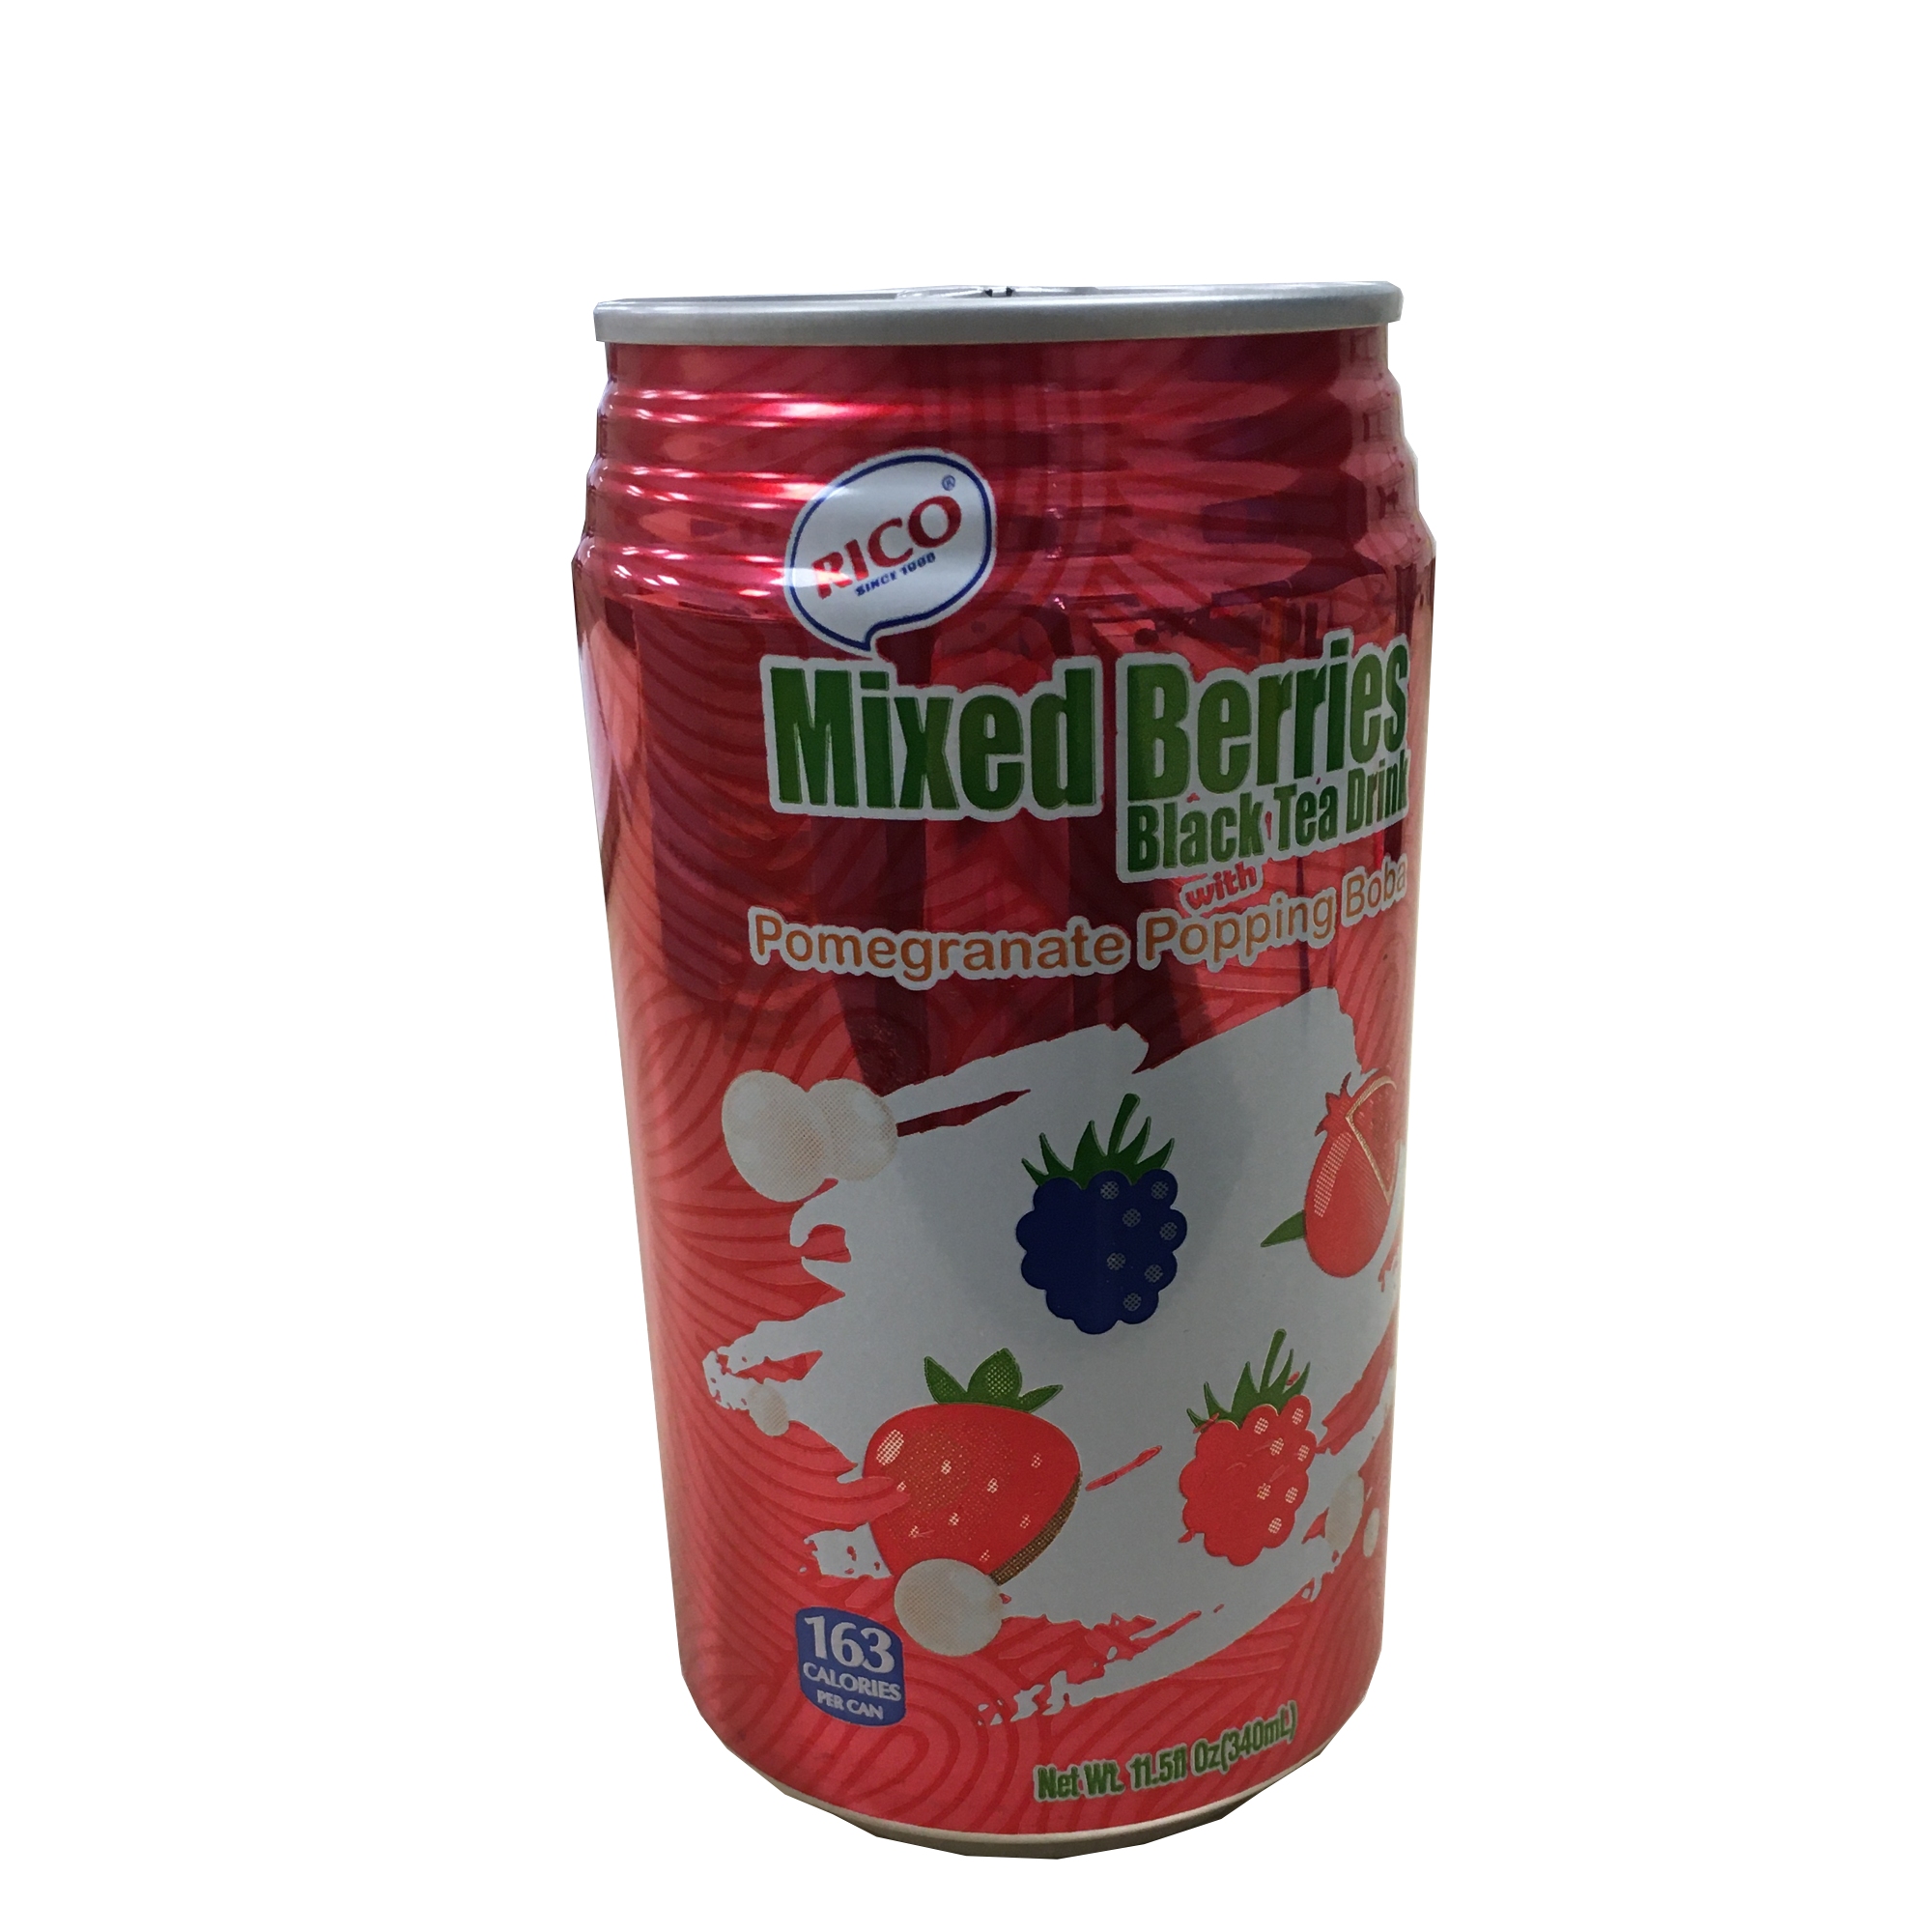 RICO MIXED BERRIES BLACK TEA DRINK w/popping Boba DR270081